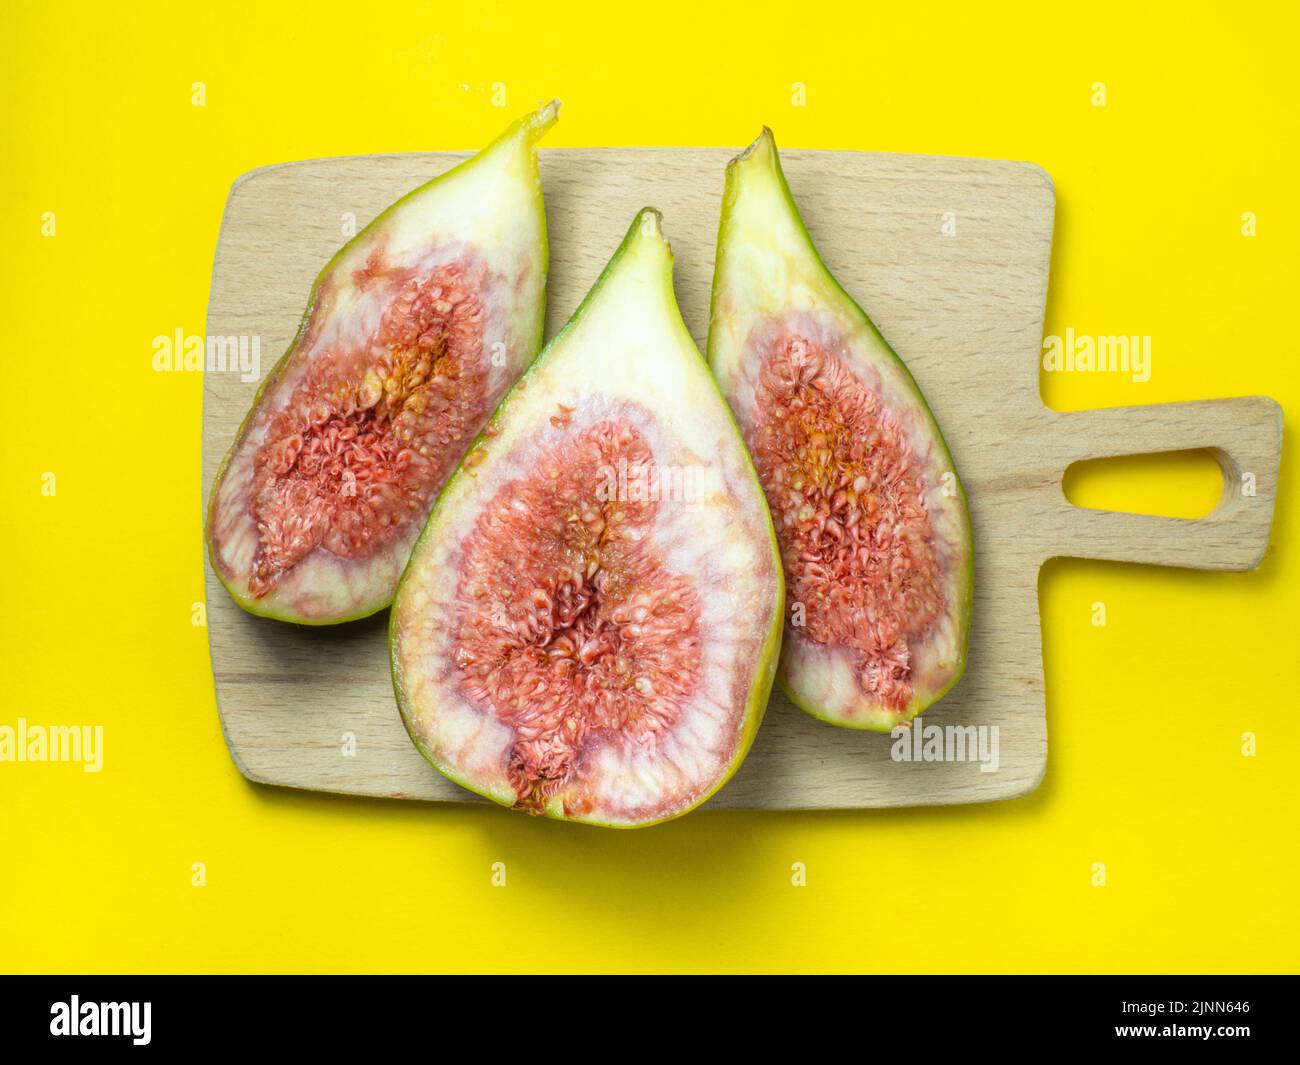 sliced figs on a cutting board. Juicy ripe fruit on a yellow background. Diet food. Fig isolate. Seeds inside. Bright picture. fruit concept Stock Photo